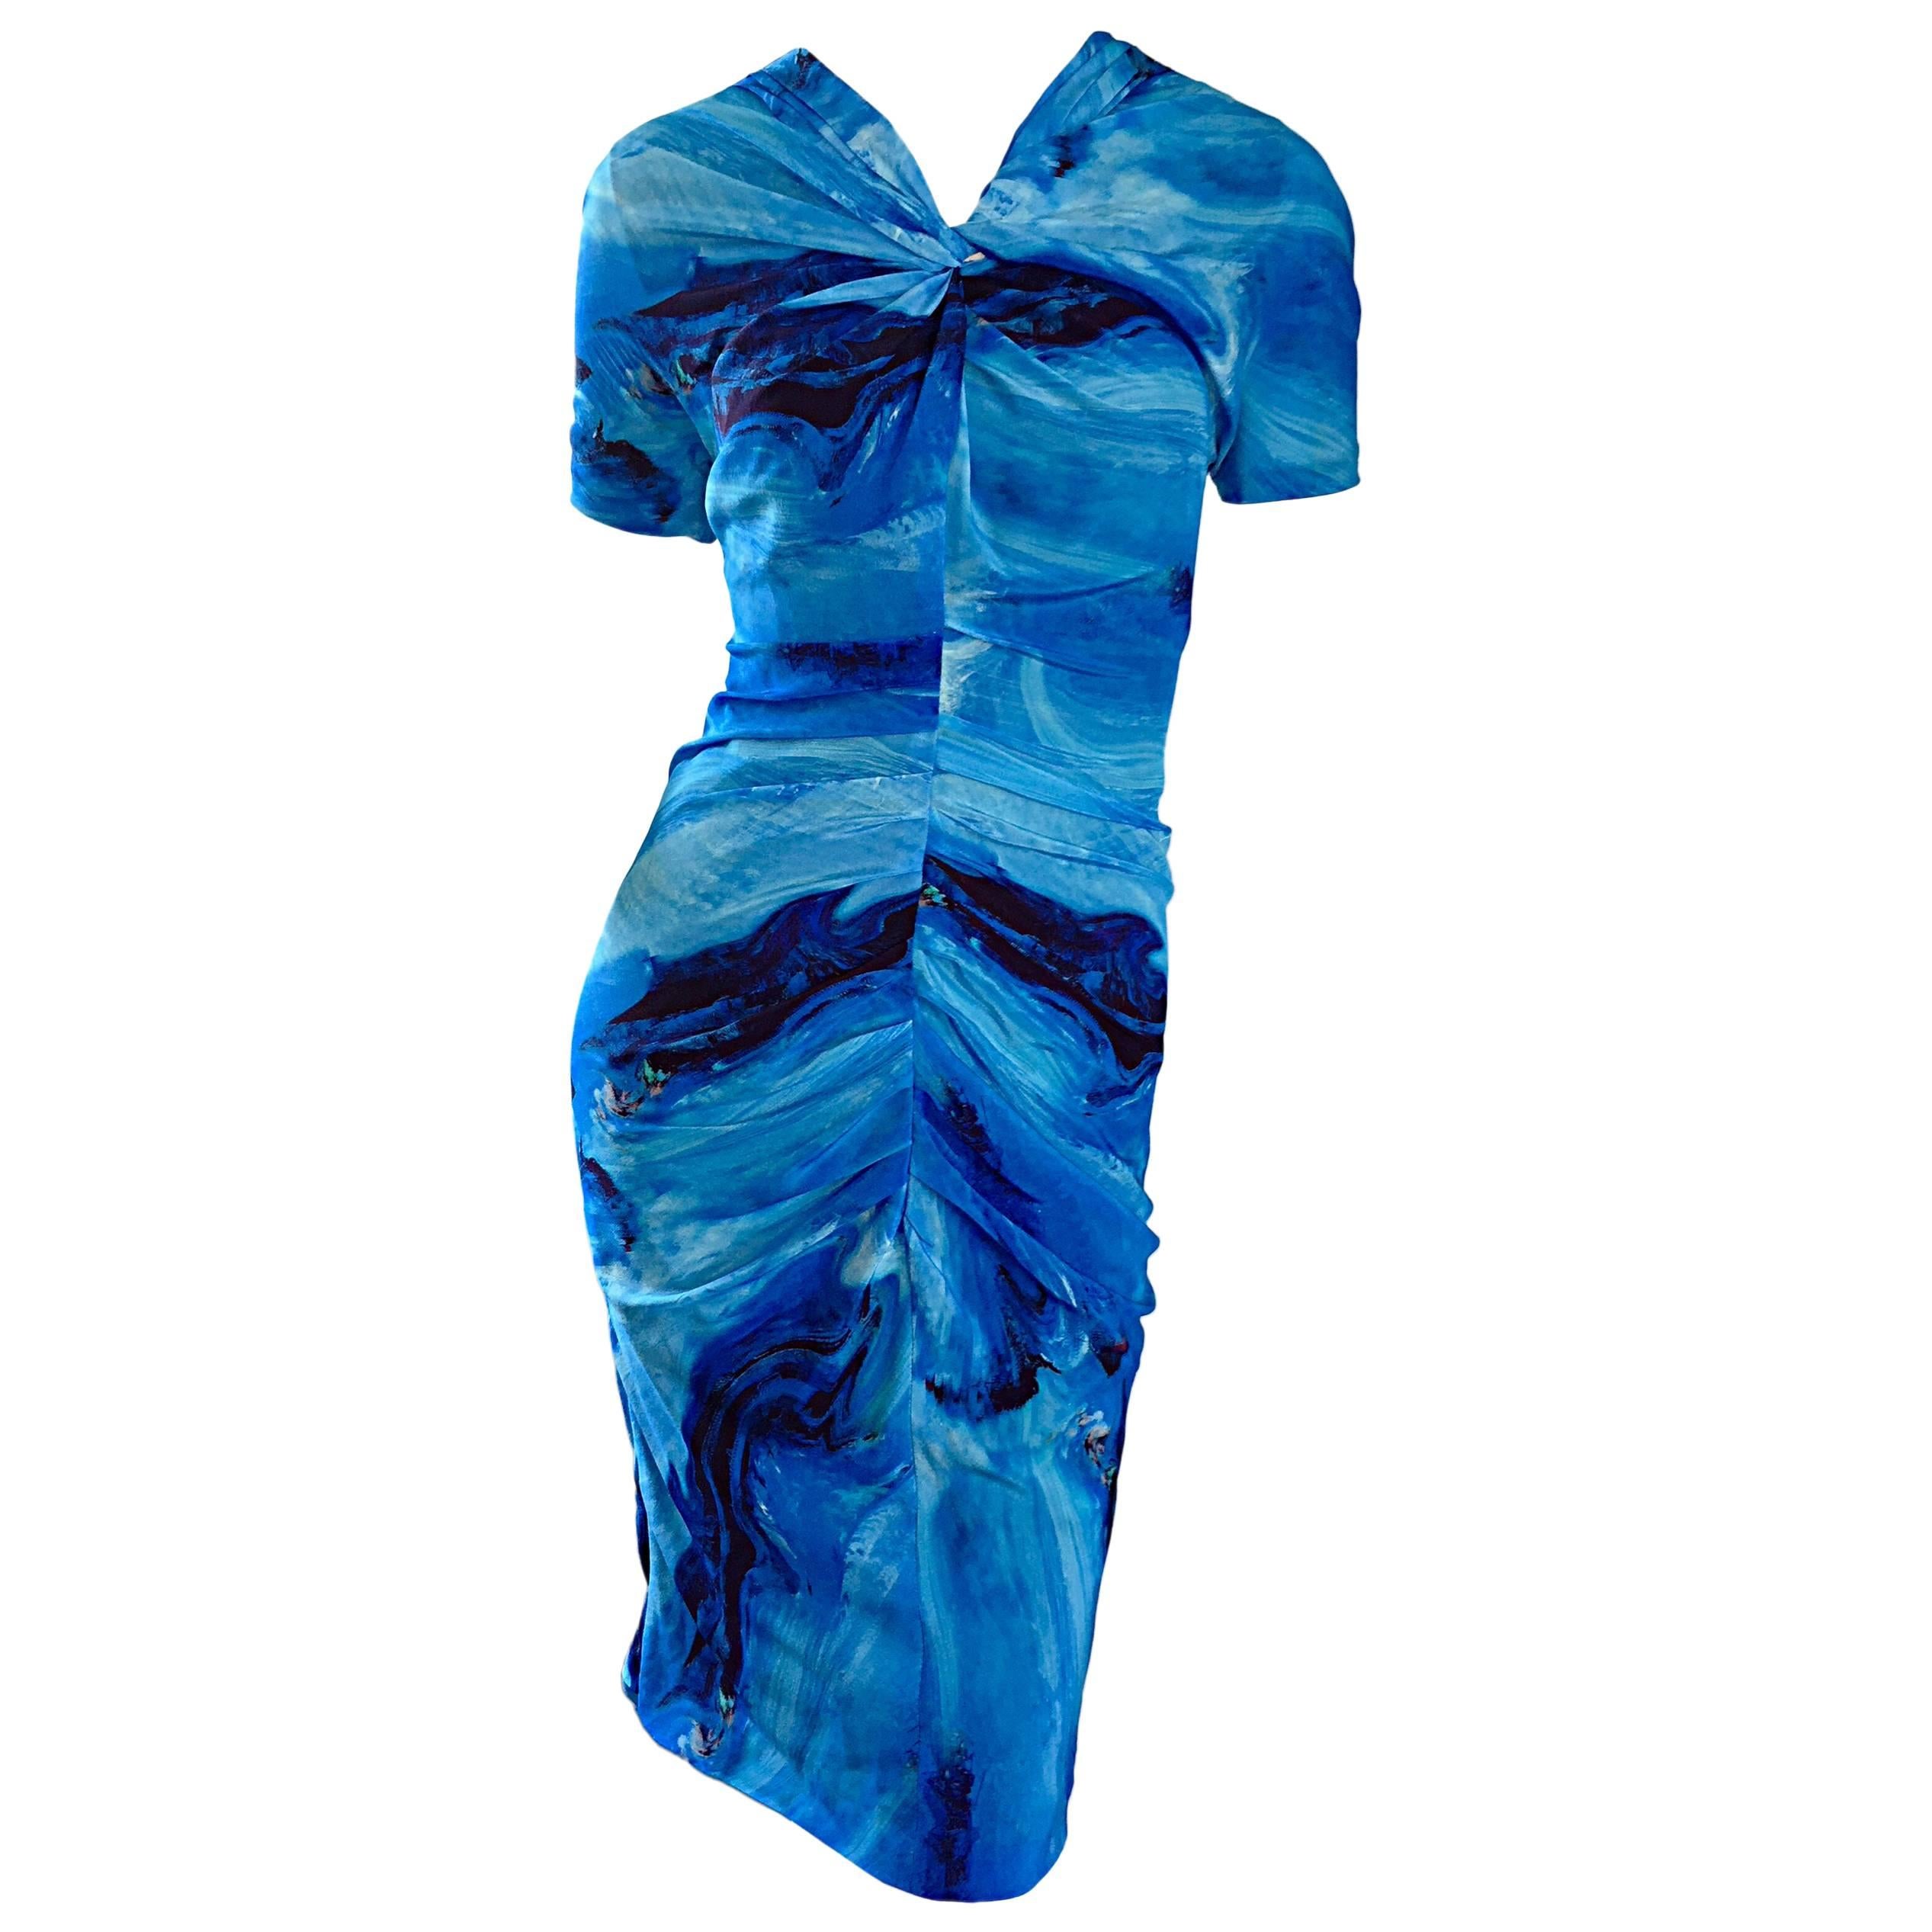 Vera Wang Collection 1990s Rare ' Ocean Wave ' Print 100% Silk 90s Ruched Dress